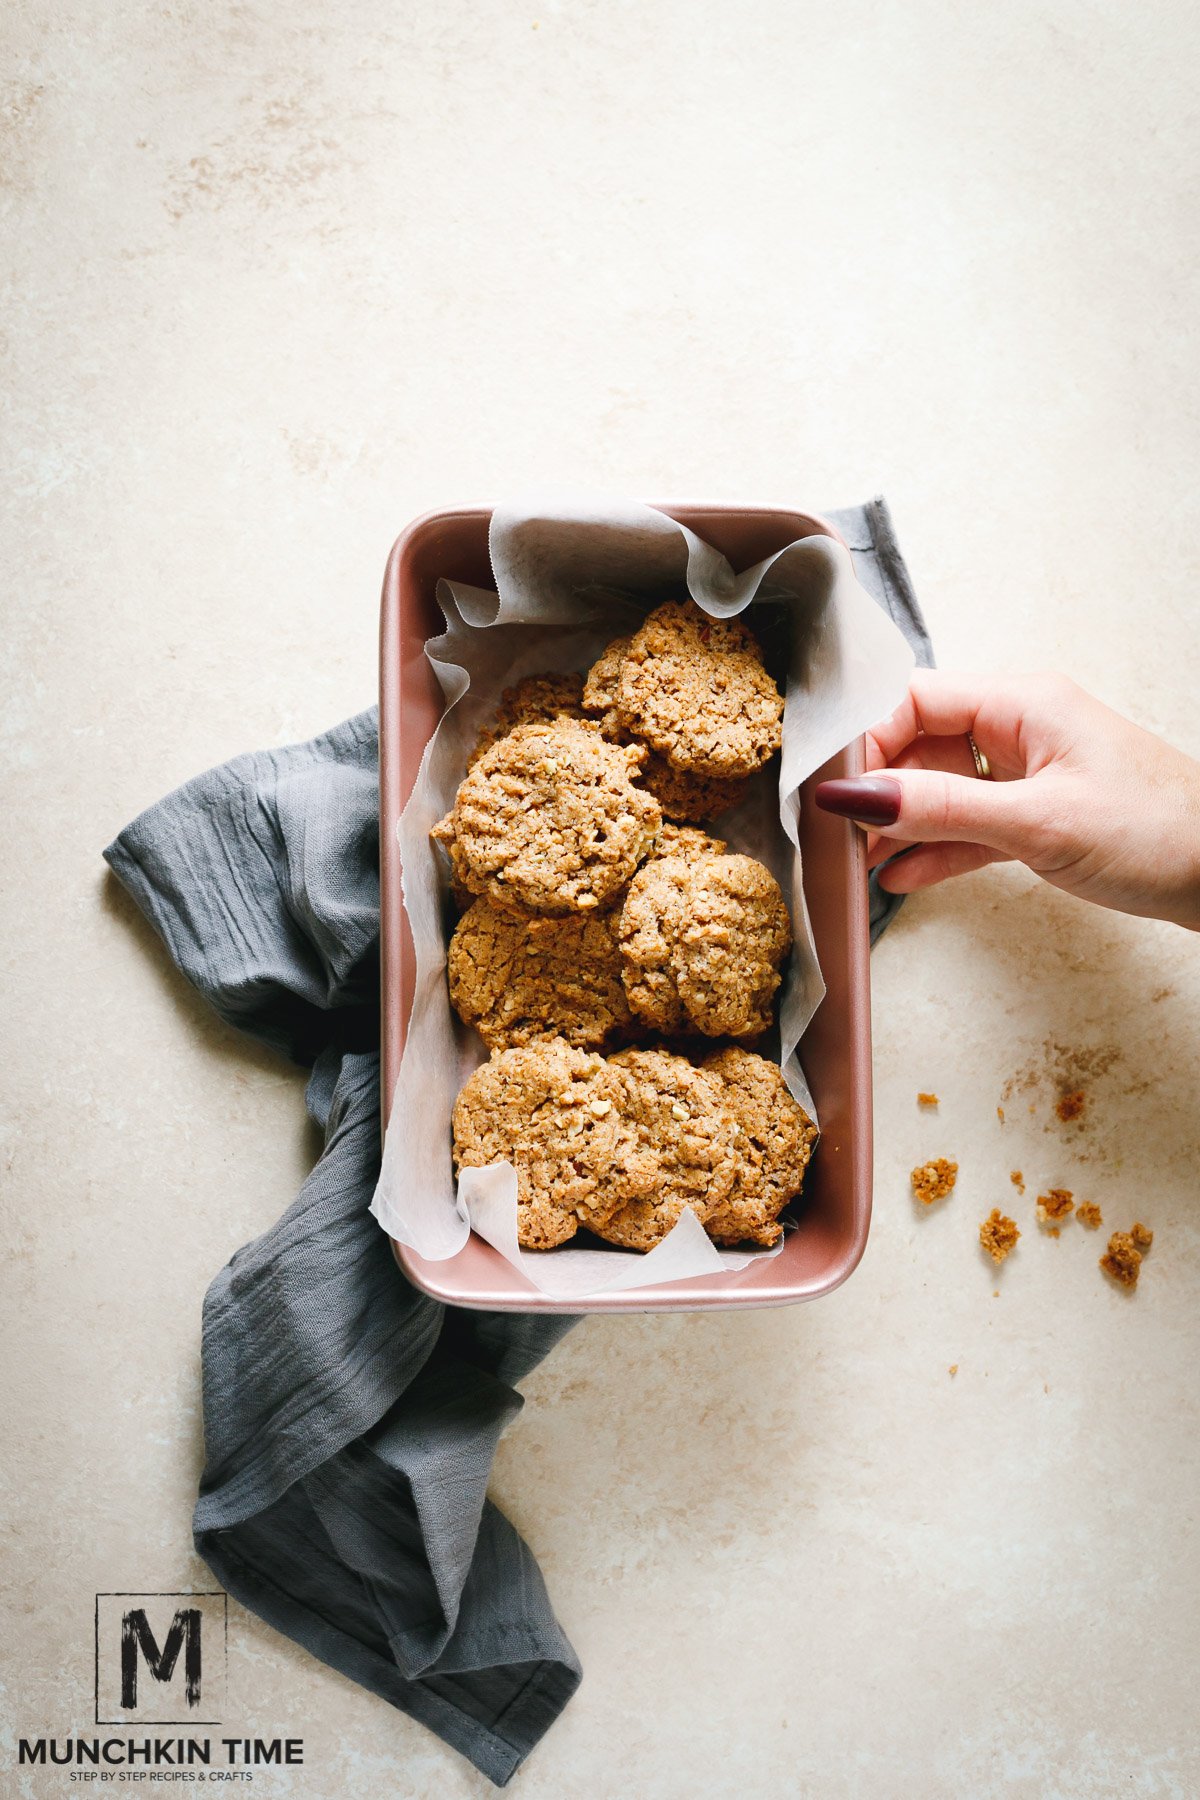 Best Ever Almond Butter Cookies Using Only 3 Ingredients - the most delicious and super easy cookie recipe.